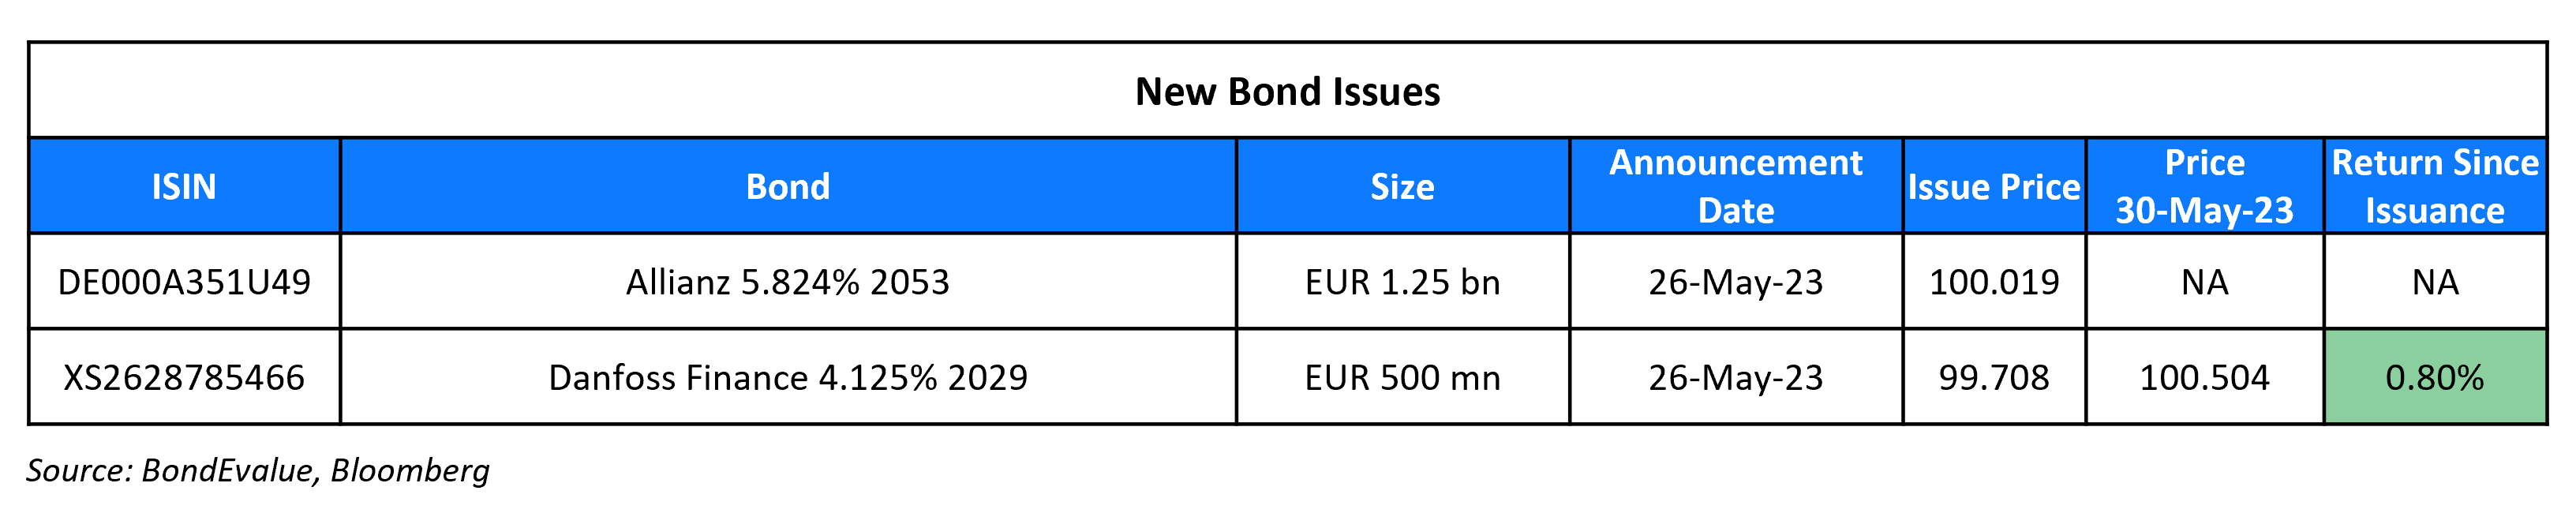 New Bond Issues 30 May 23 (1)